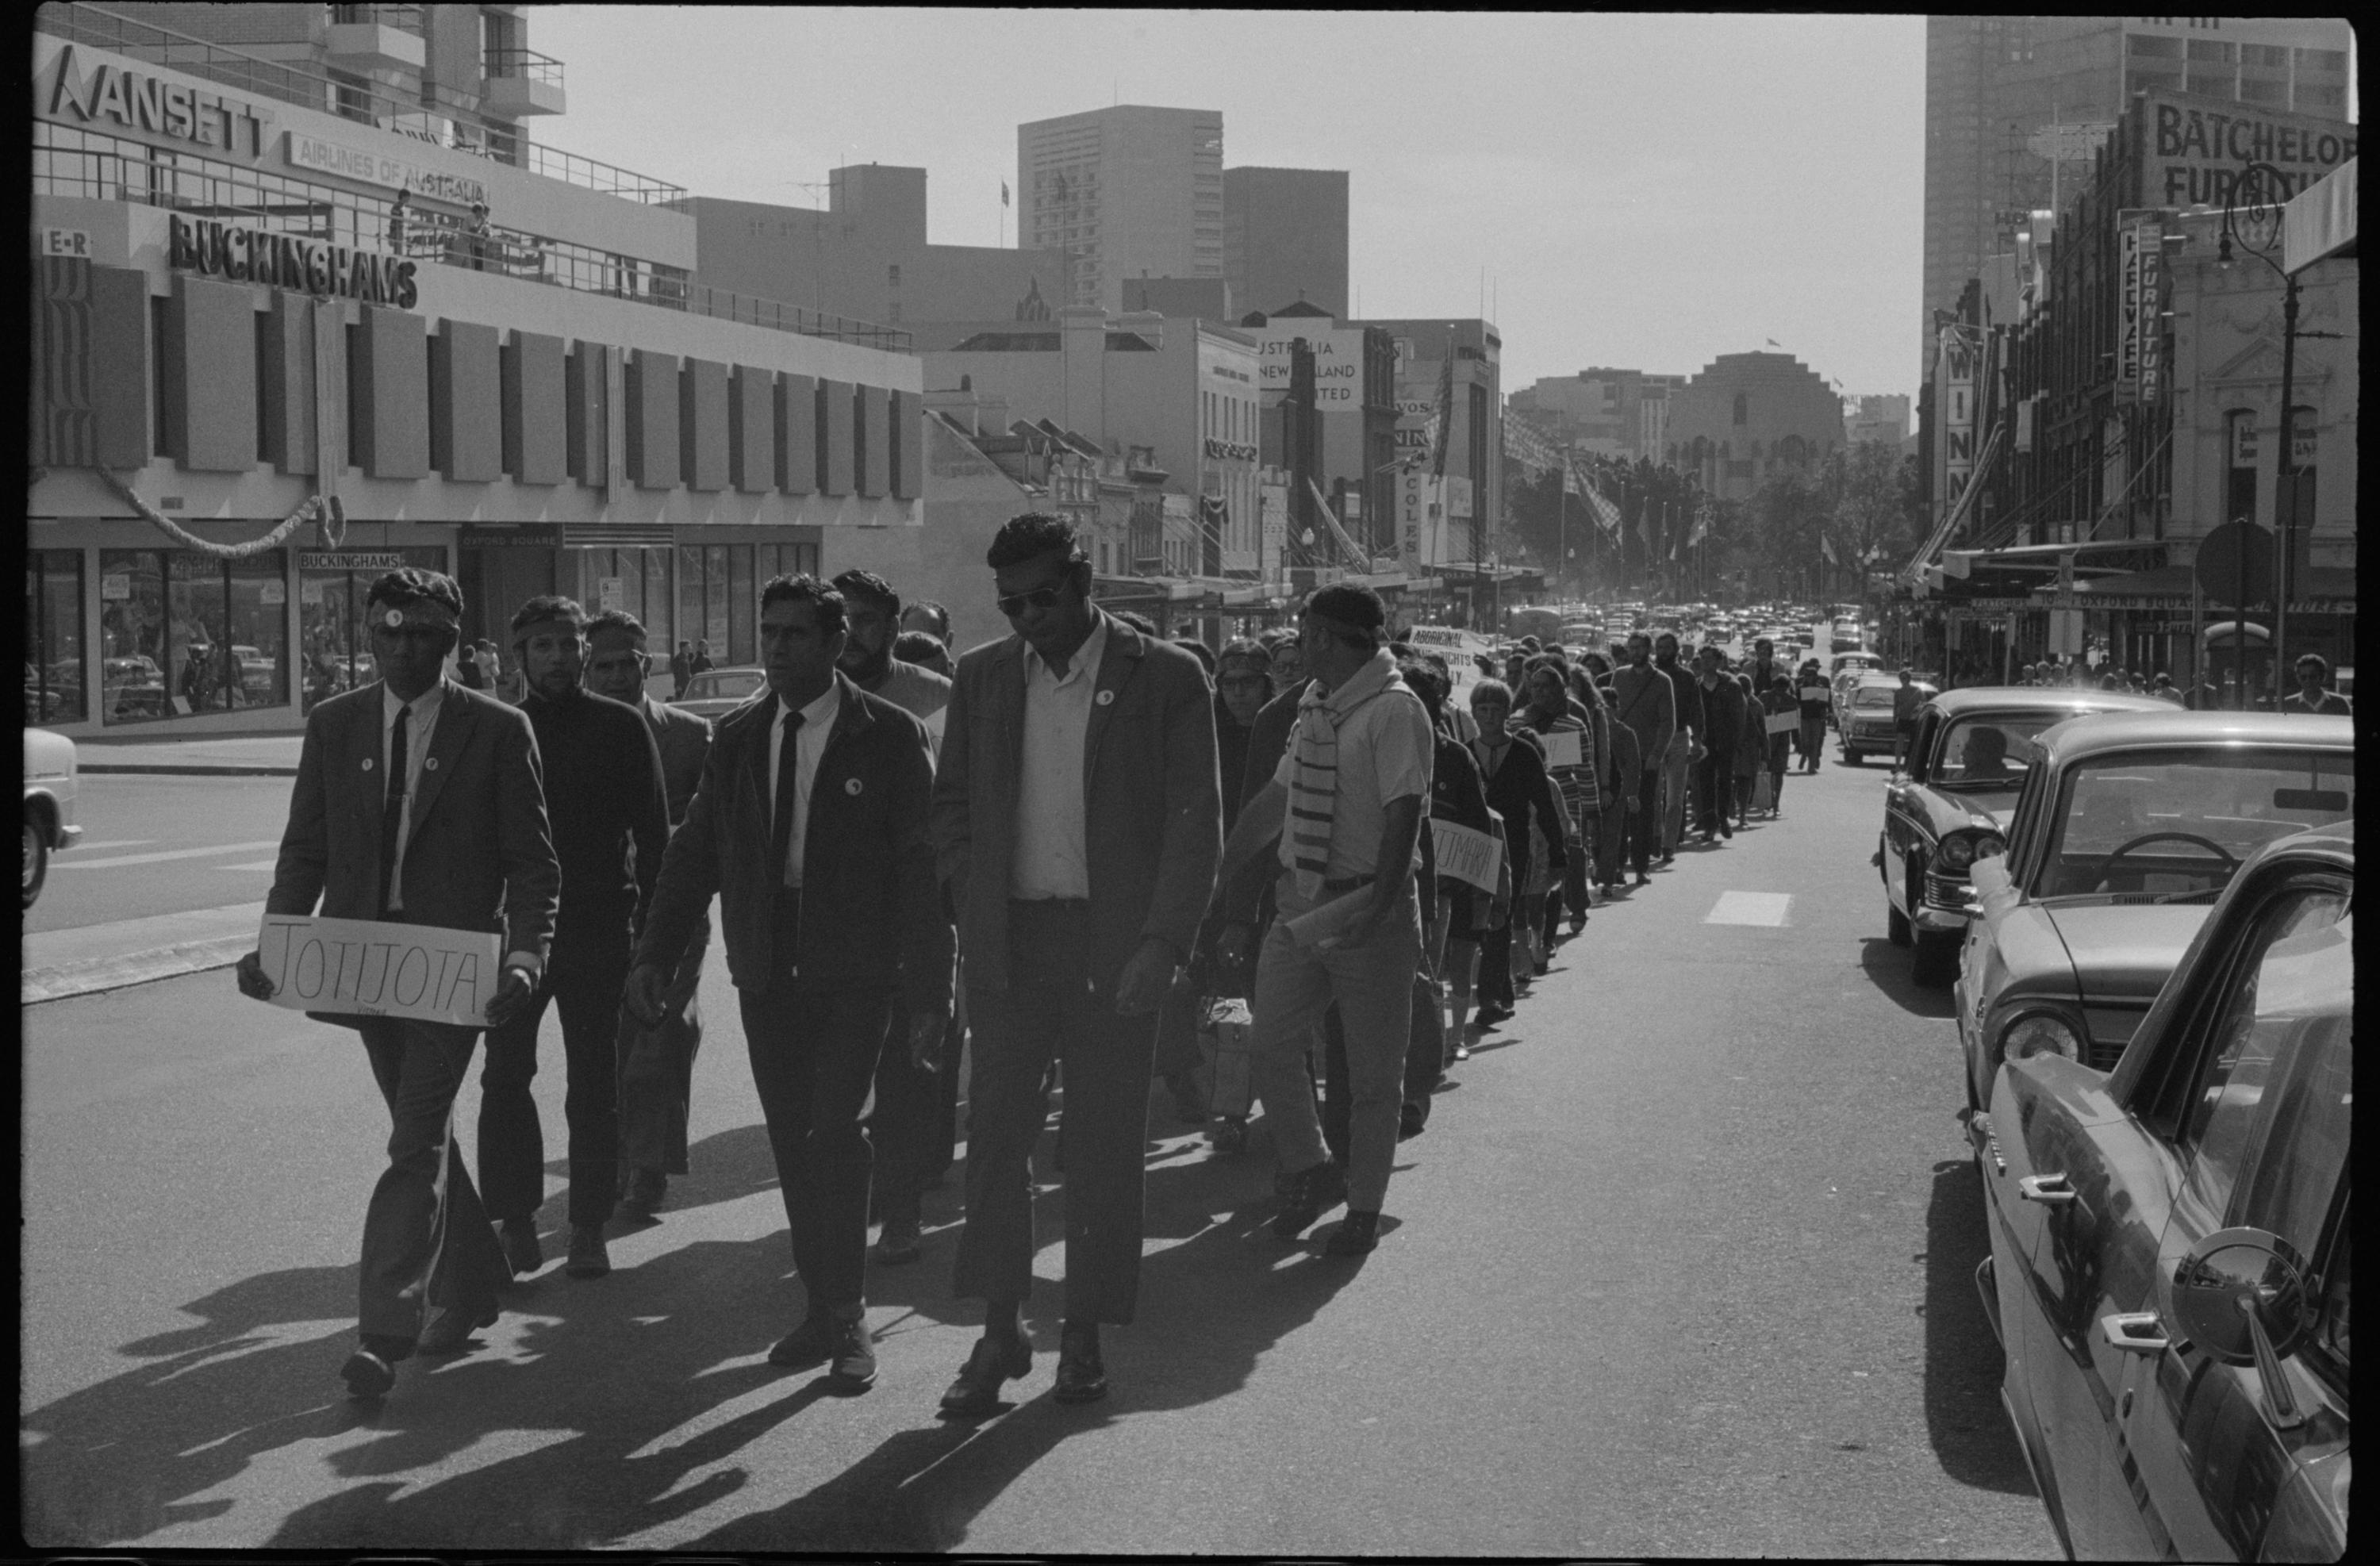 Tribune negatives including meeting of FCAATSI leaders at Sydney Town Hall and protestors at Day of Mourning memorial gathering and procession in Sydney, 28 April 1970-29 April 1970